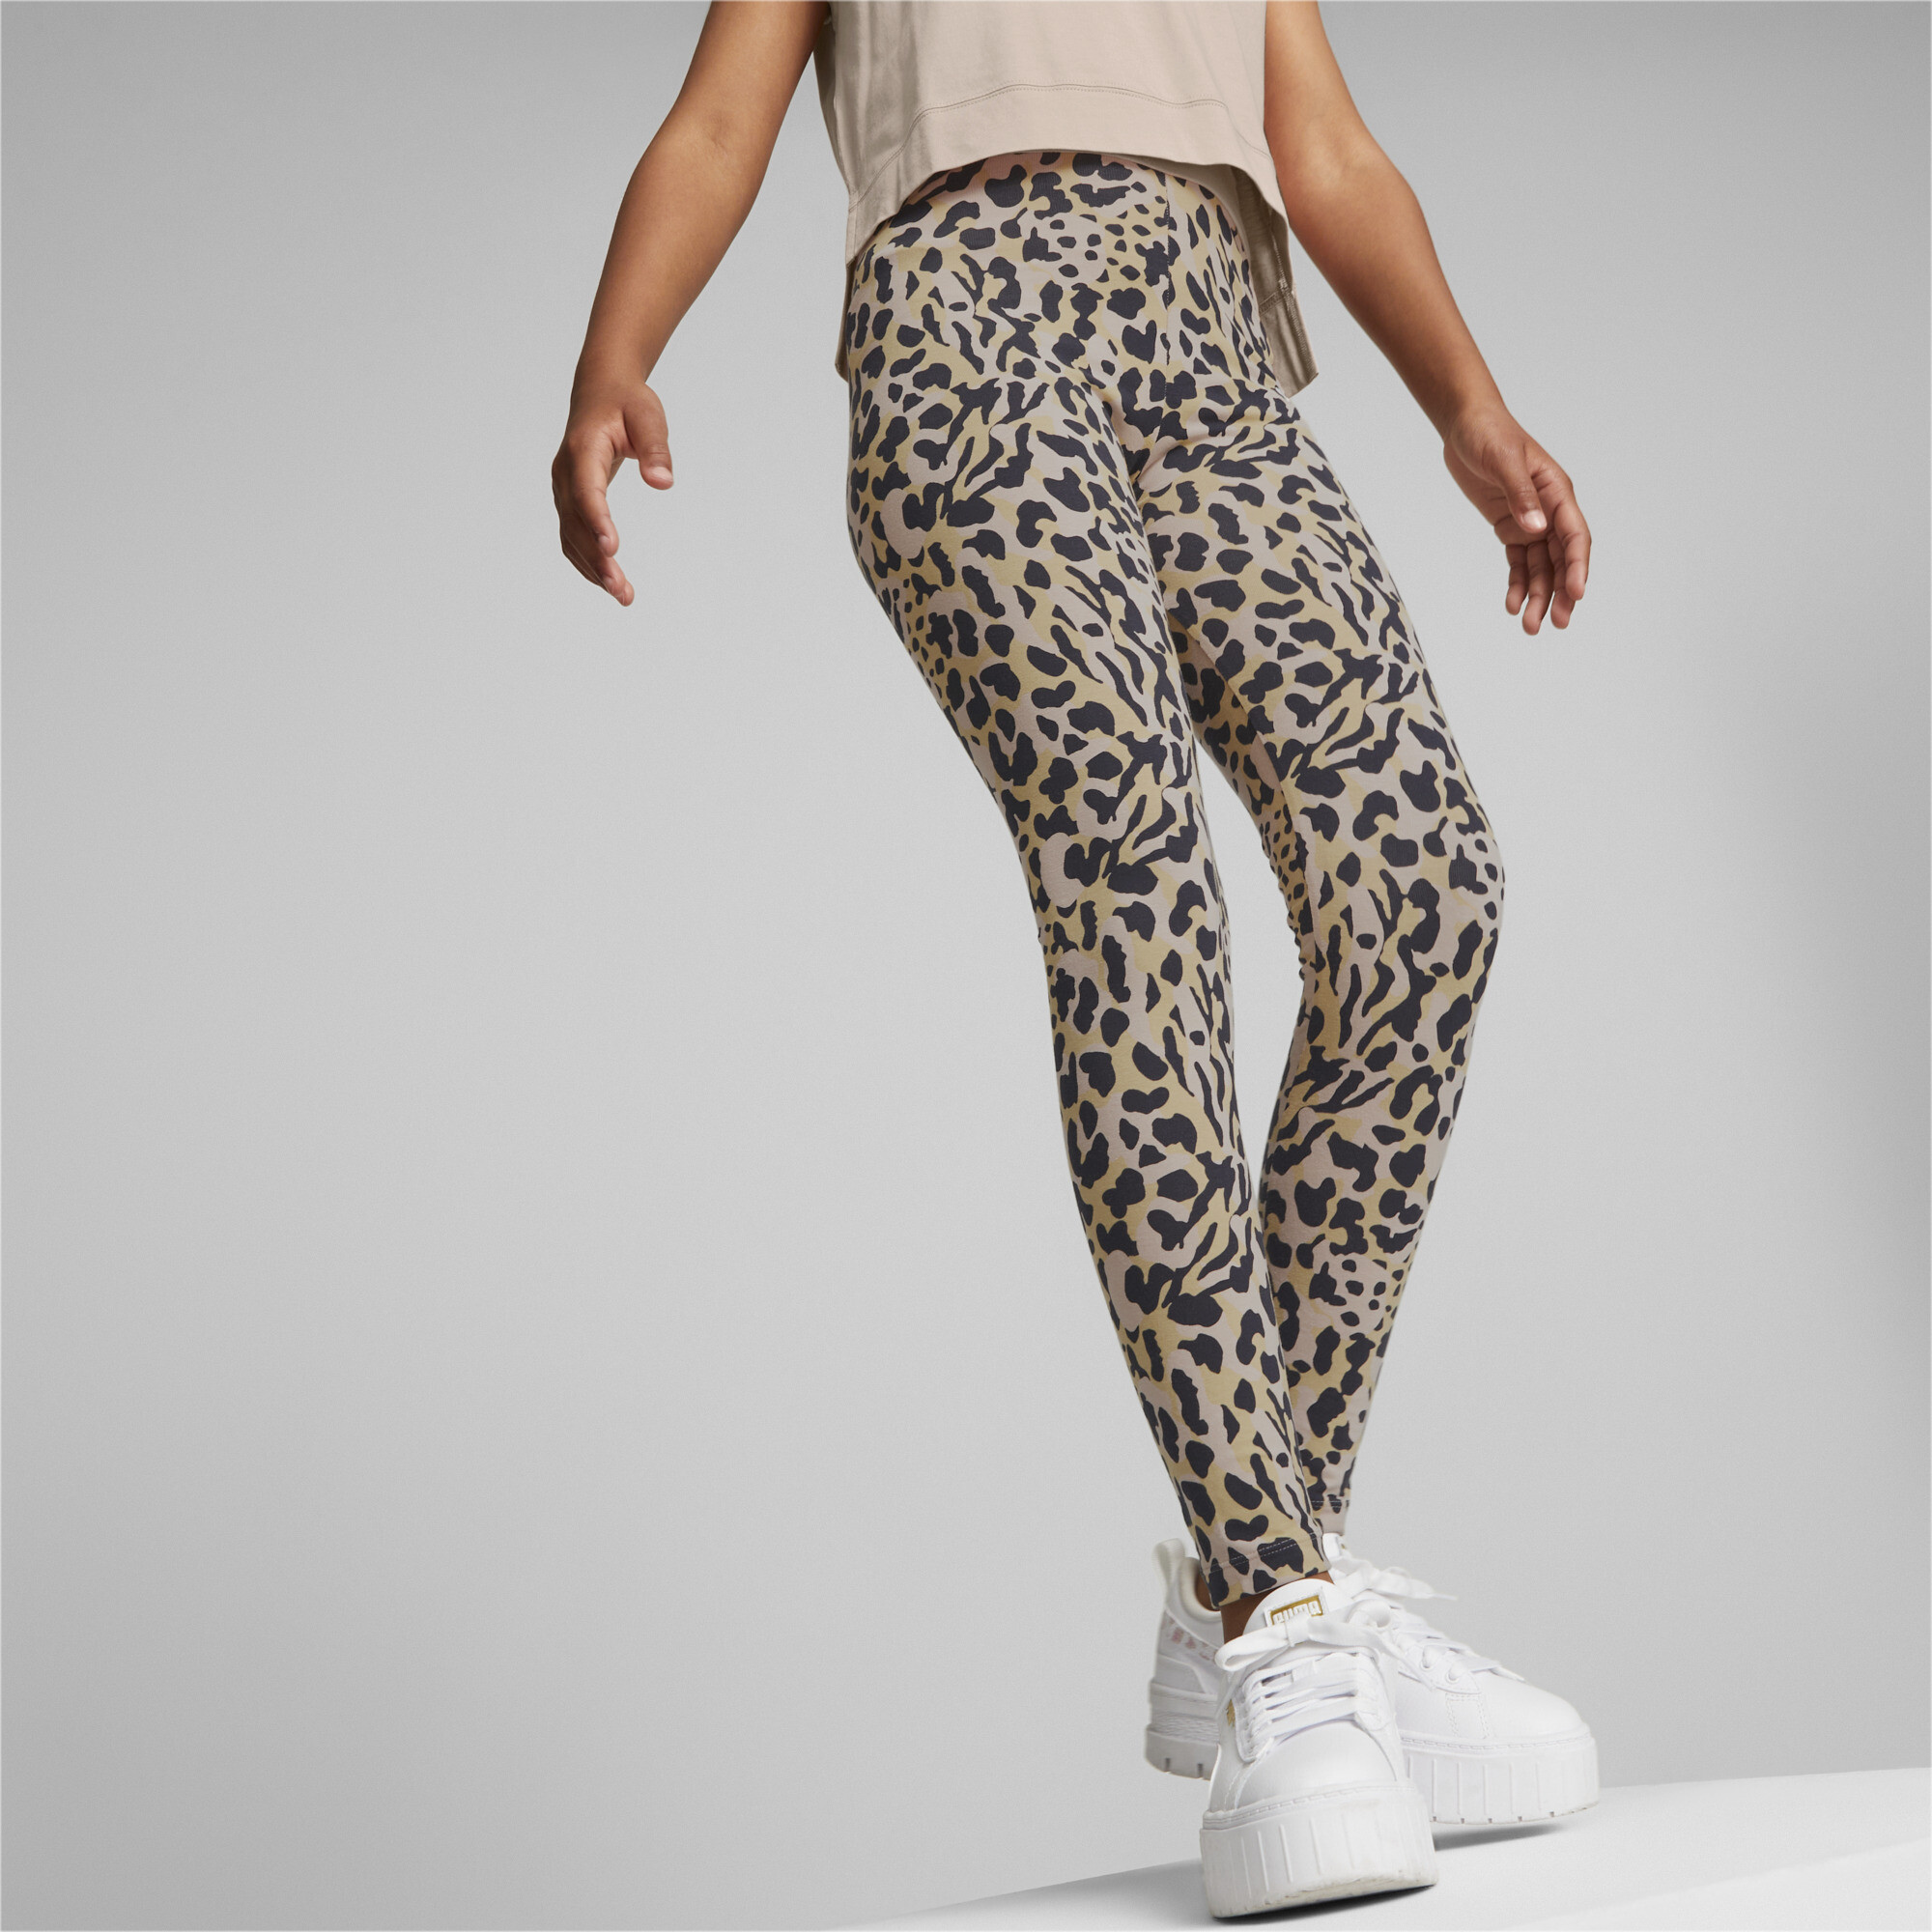 PUMA Alpha Printed Leggings In Pink, Size 11-12 Youth